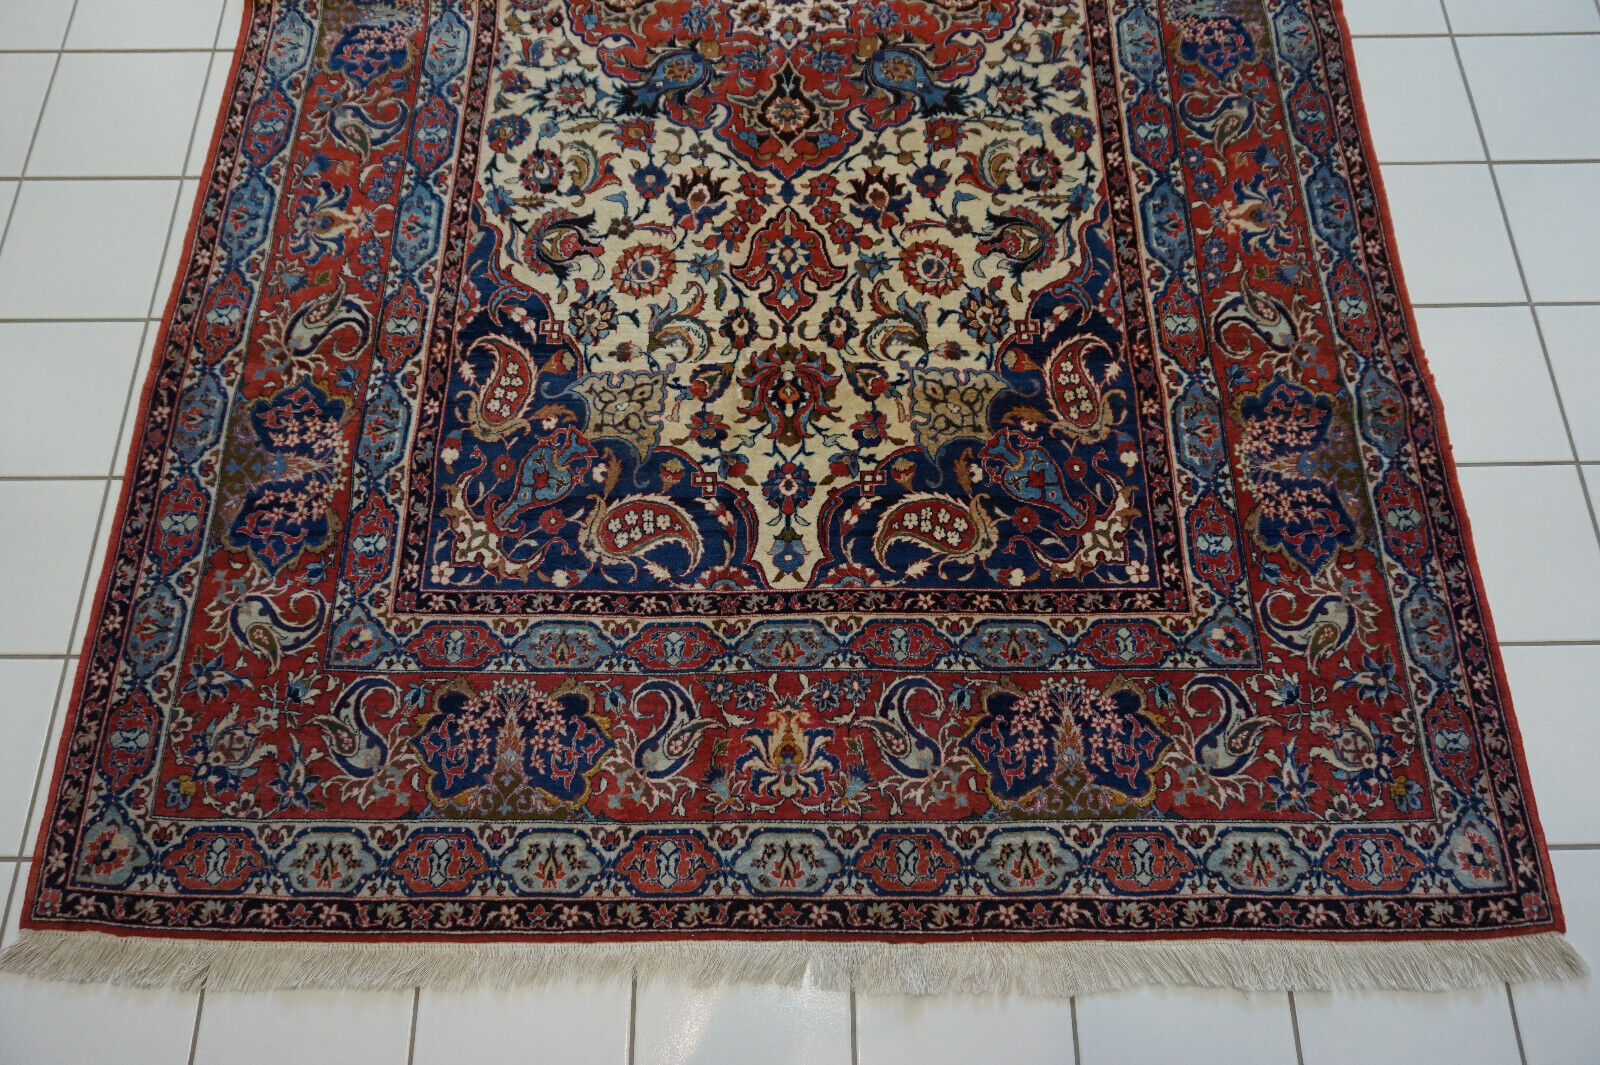 Close-up of the elaborate floral design on the Handmade Antique Persian Style Isfahan Rug